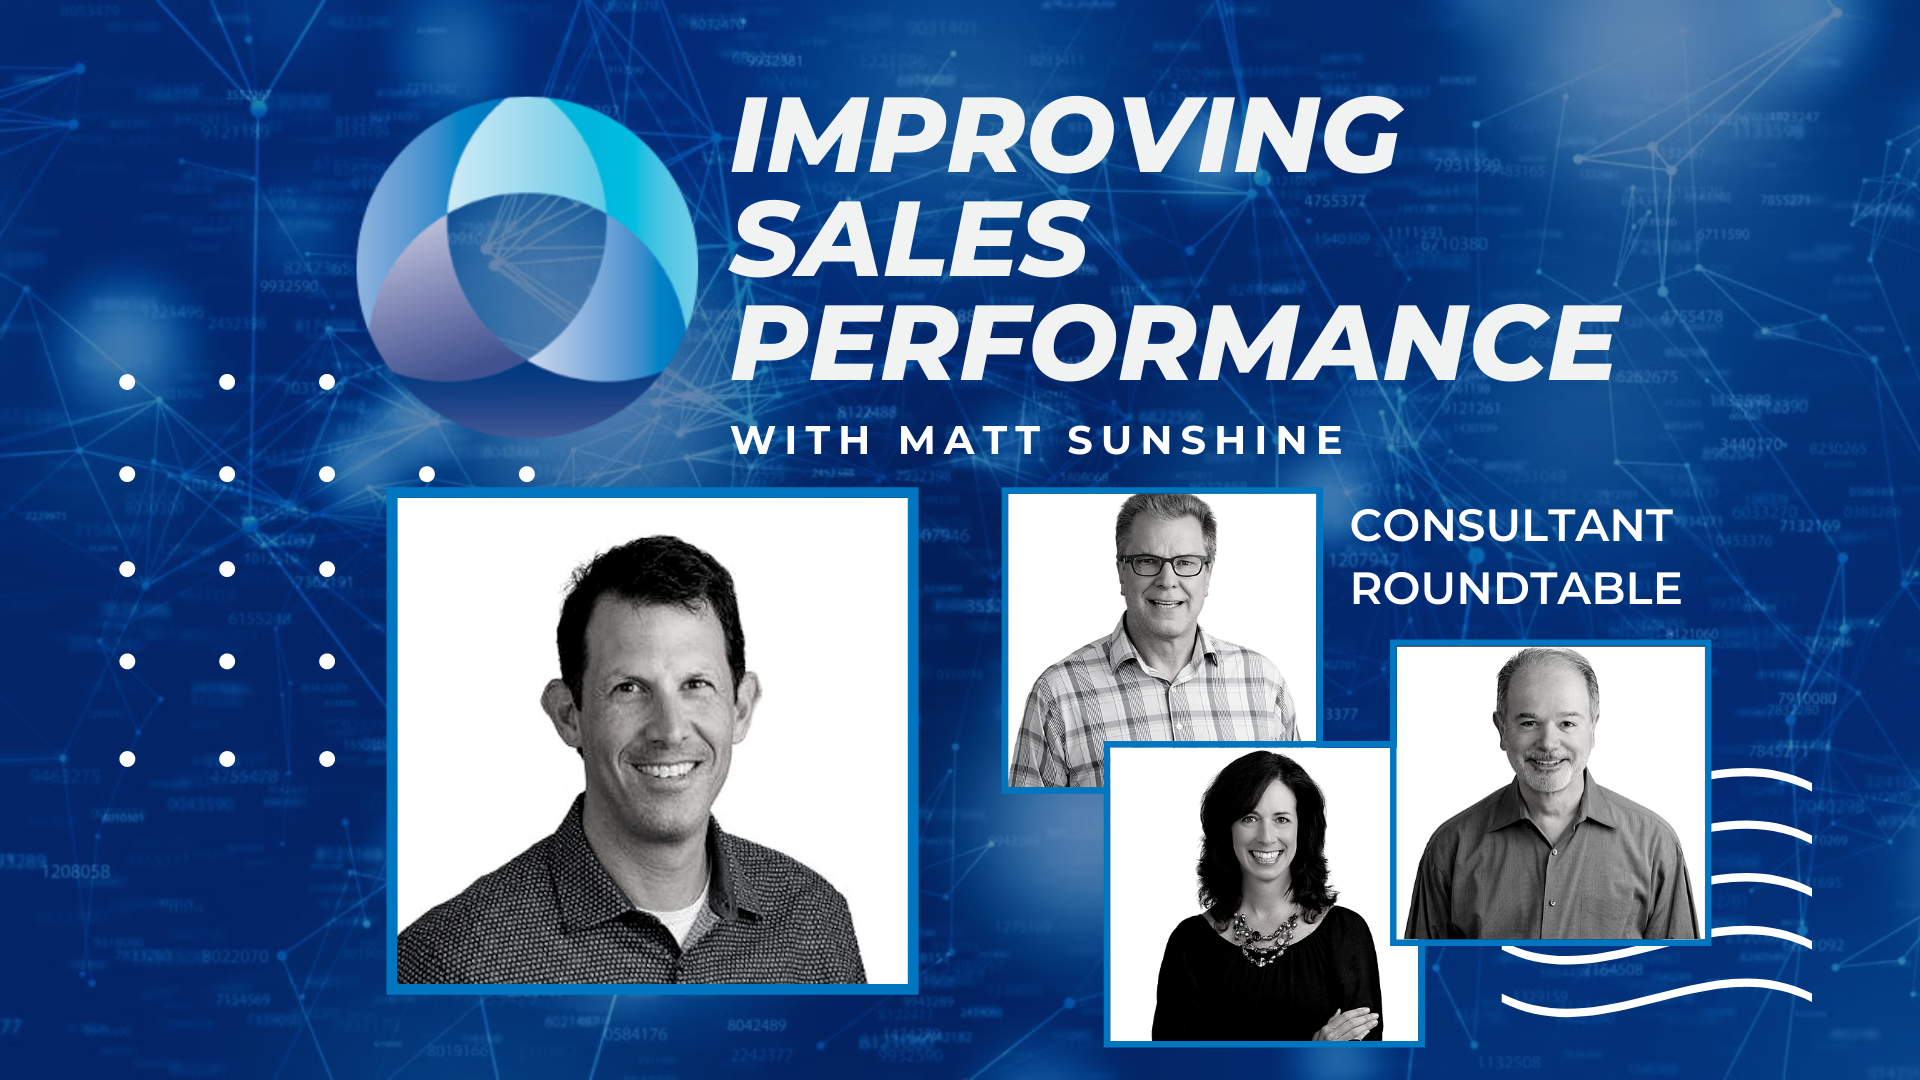 Improving Sales Performance: Consultant Roundtable